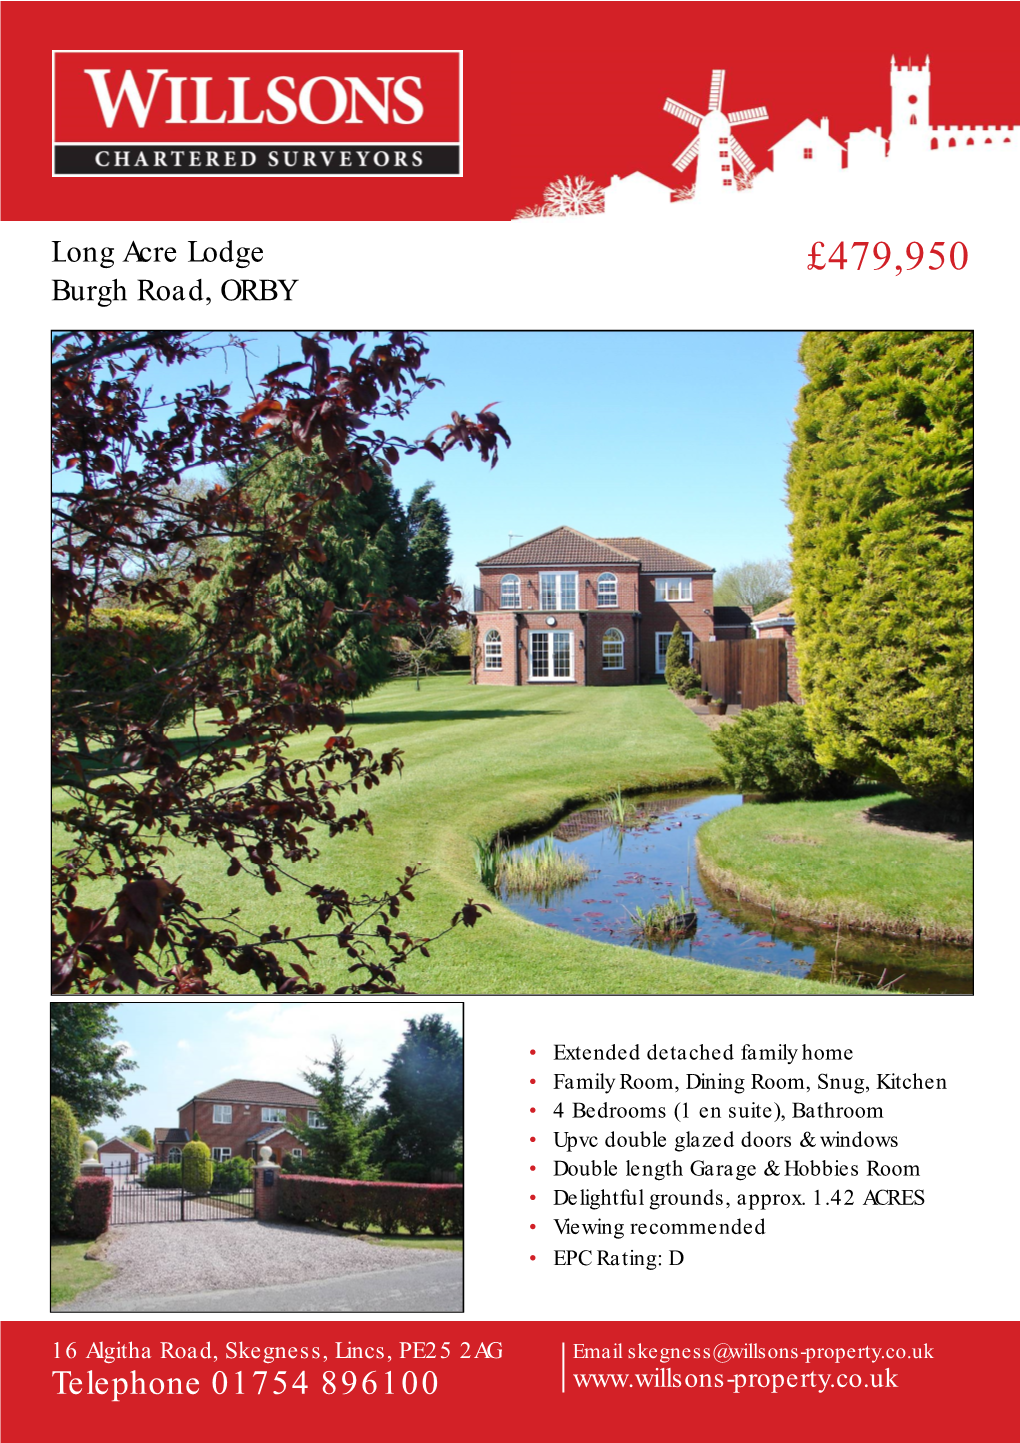 Long Acre Lodge Burgh Road, ORBY £479,950